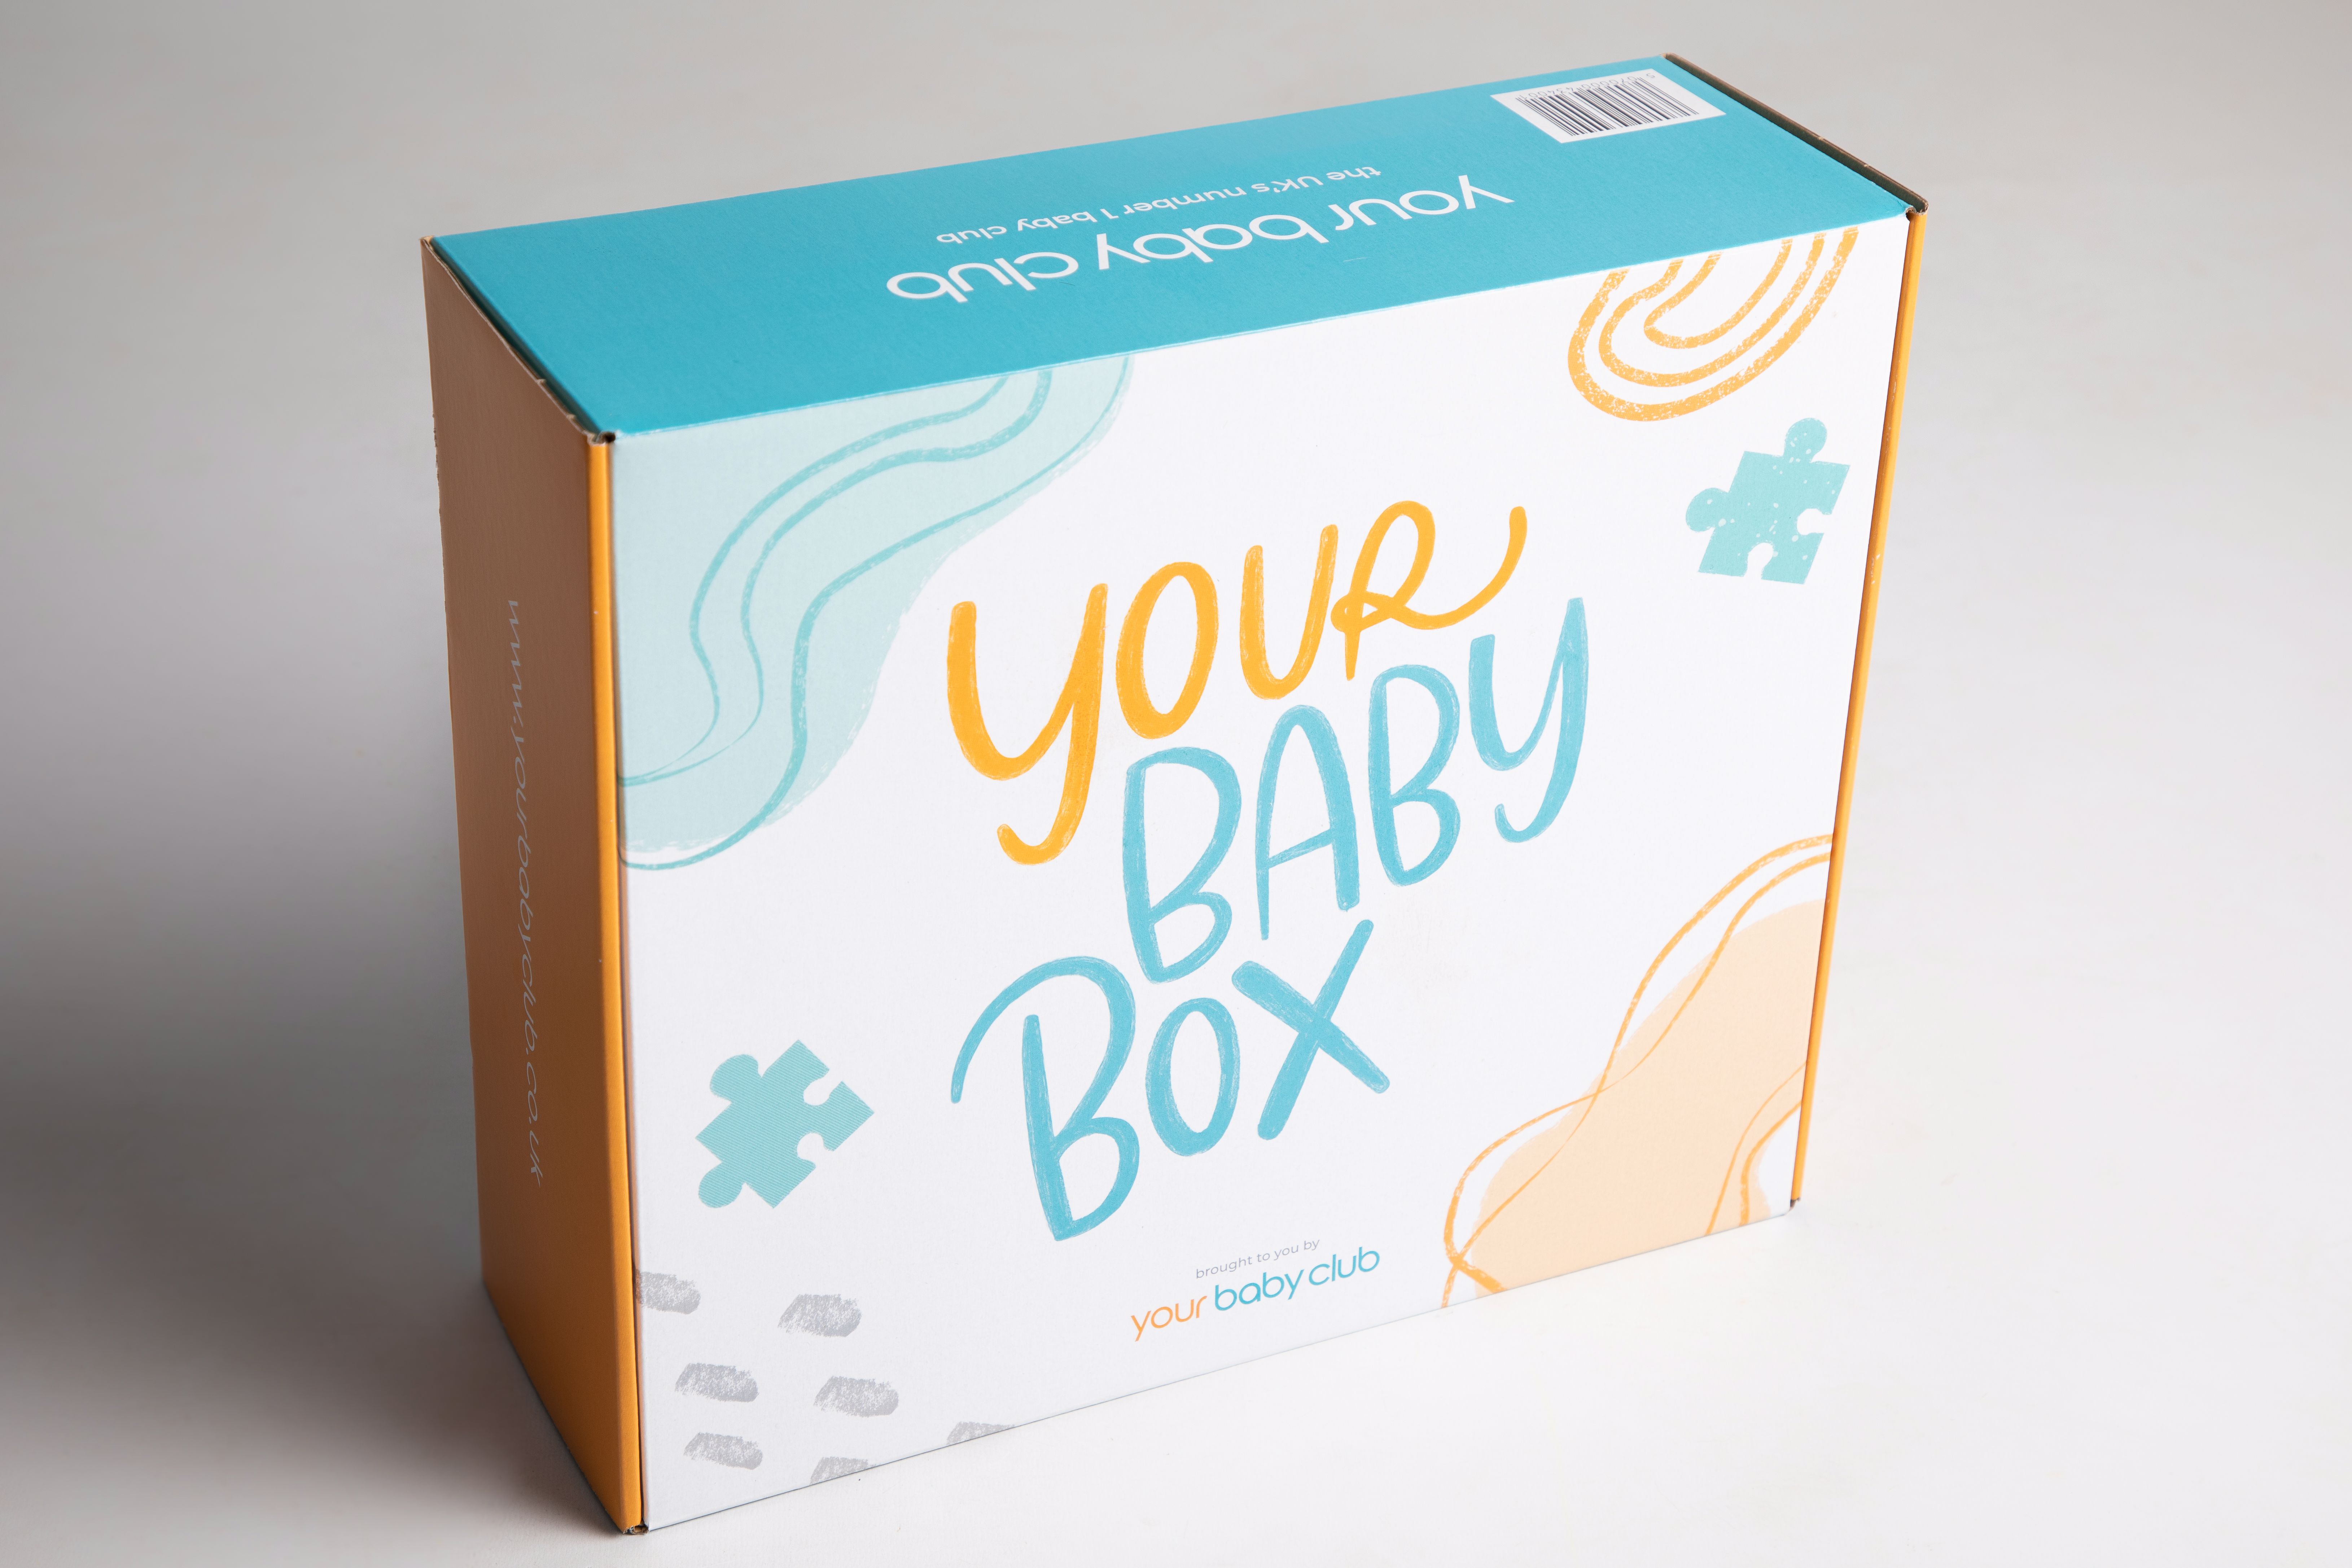 Your Baby Box